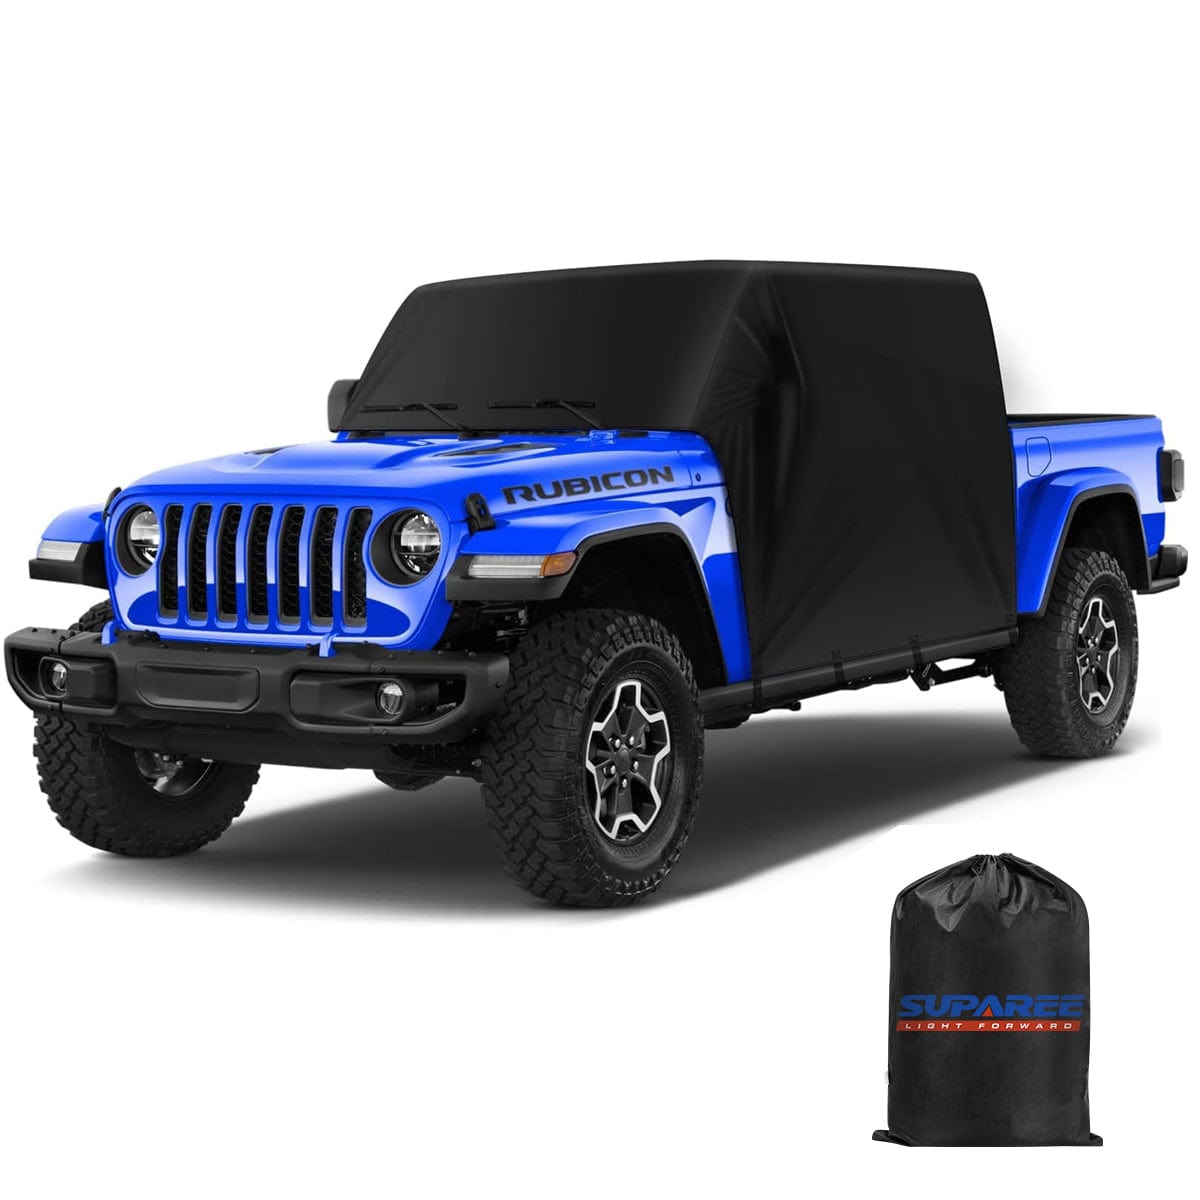 SUPAREE Jeep Cover Suparee Jeep Gladiator Cab Cover All Protection for 2020-2022 JT 4 Door Product description